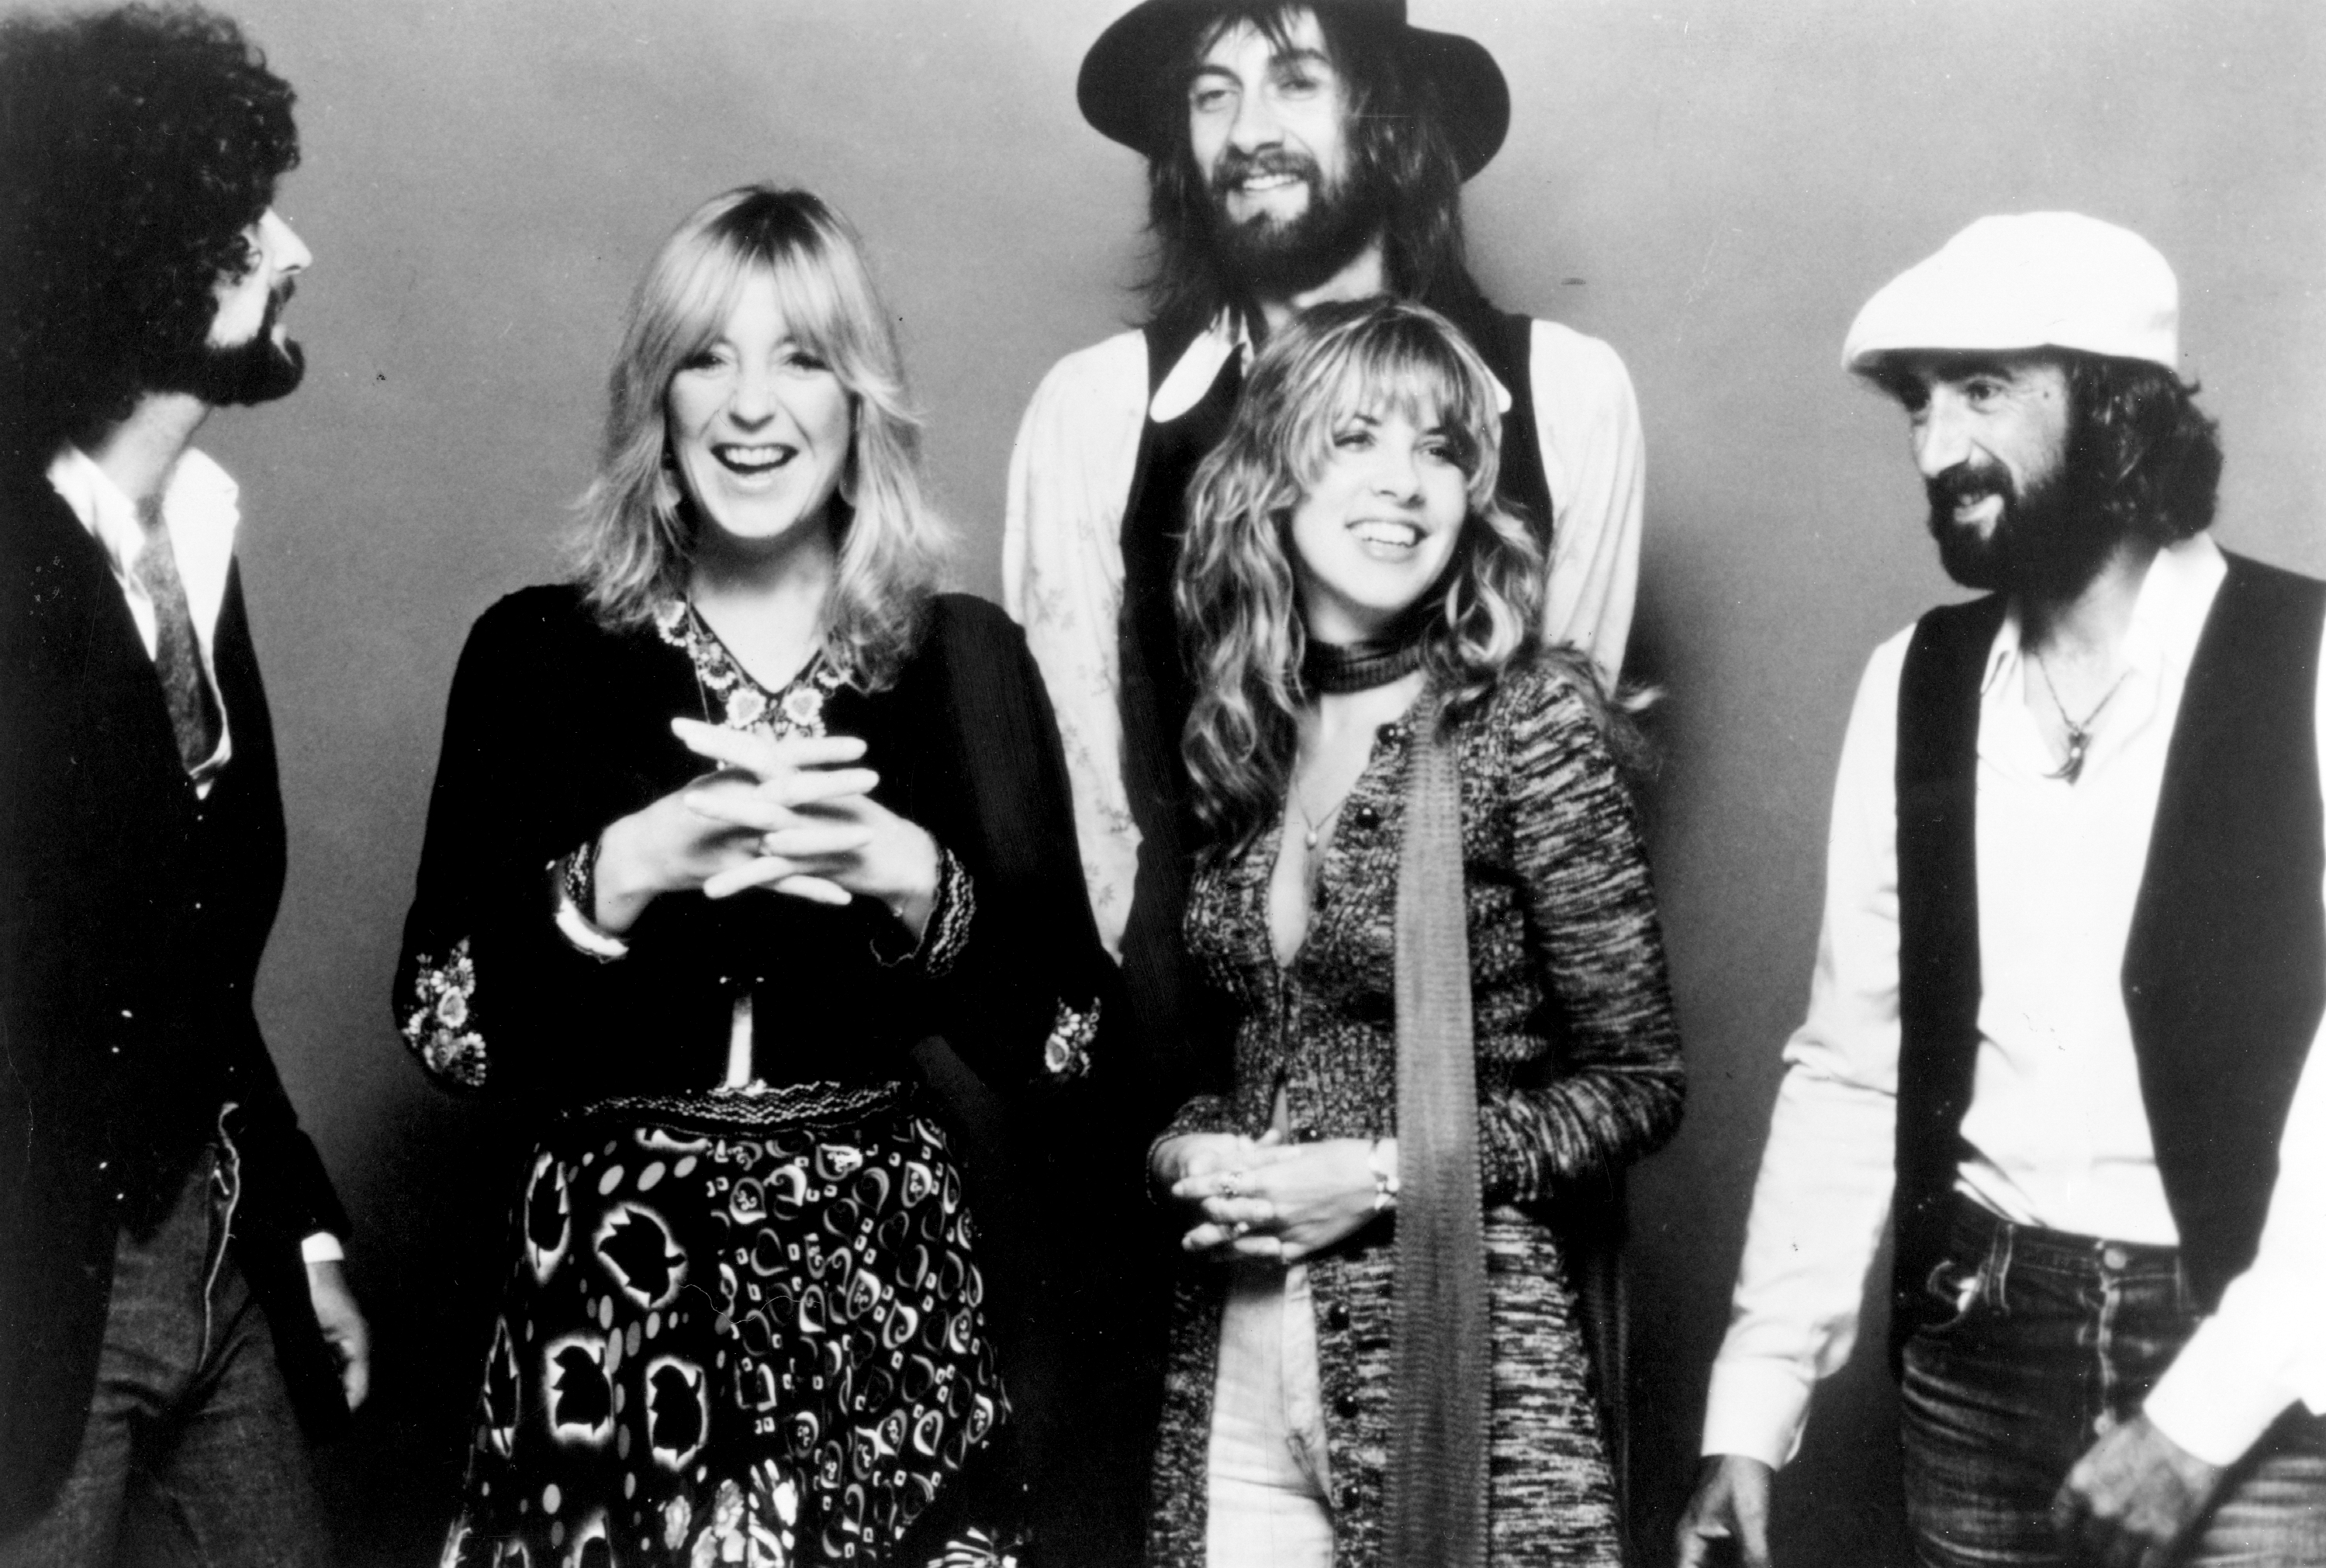 Fleetwood Mac's 'Dreams' is gaining popularity, thanks to that hilarious  now-viral TikTok